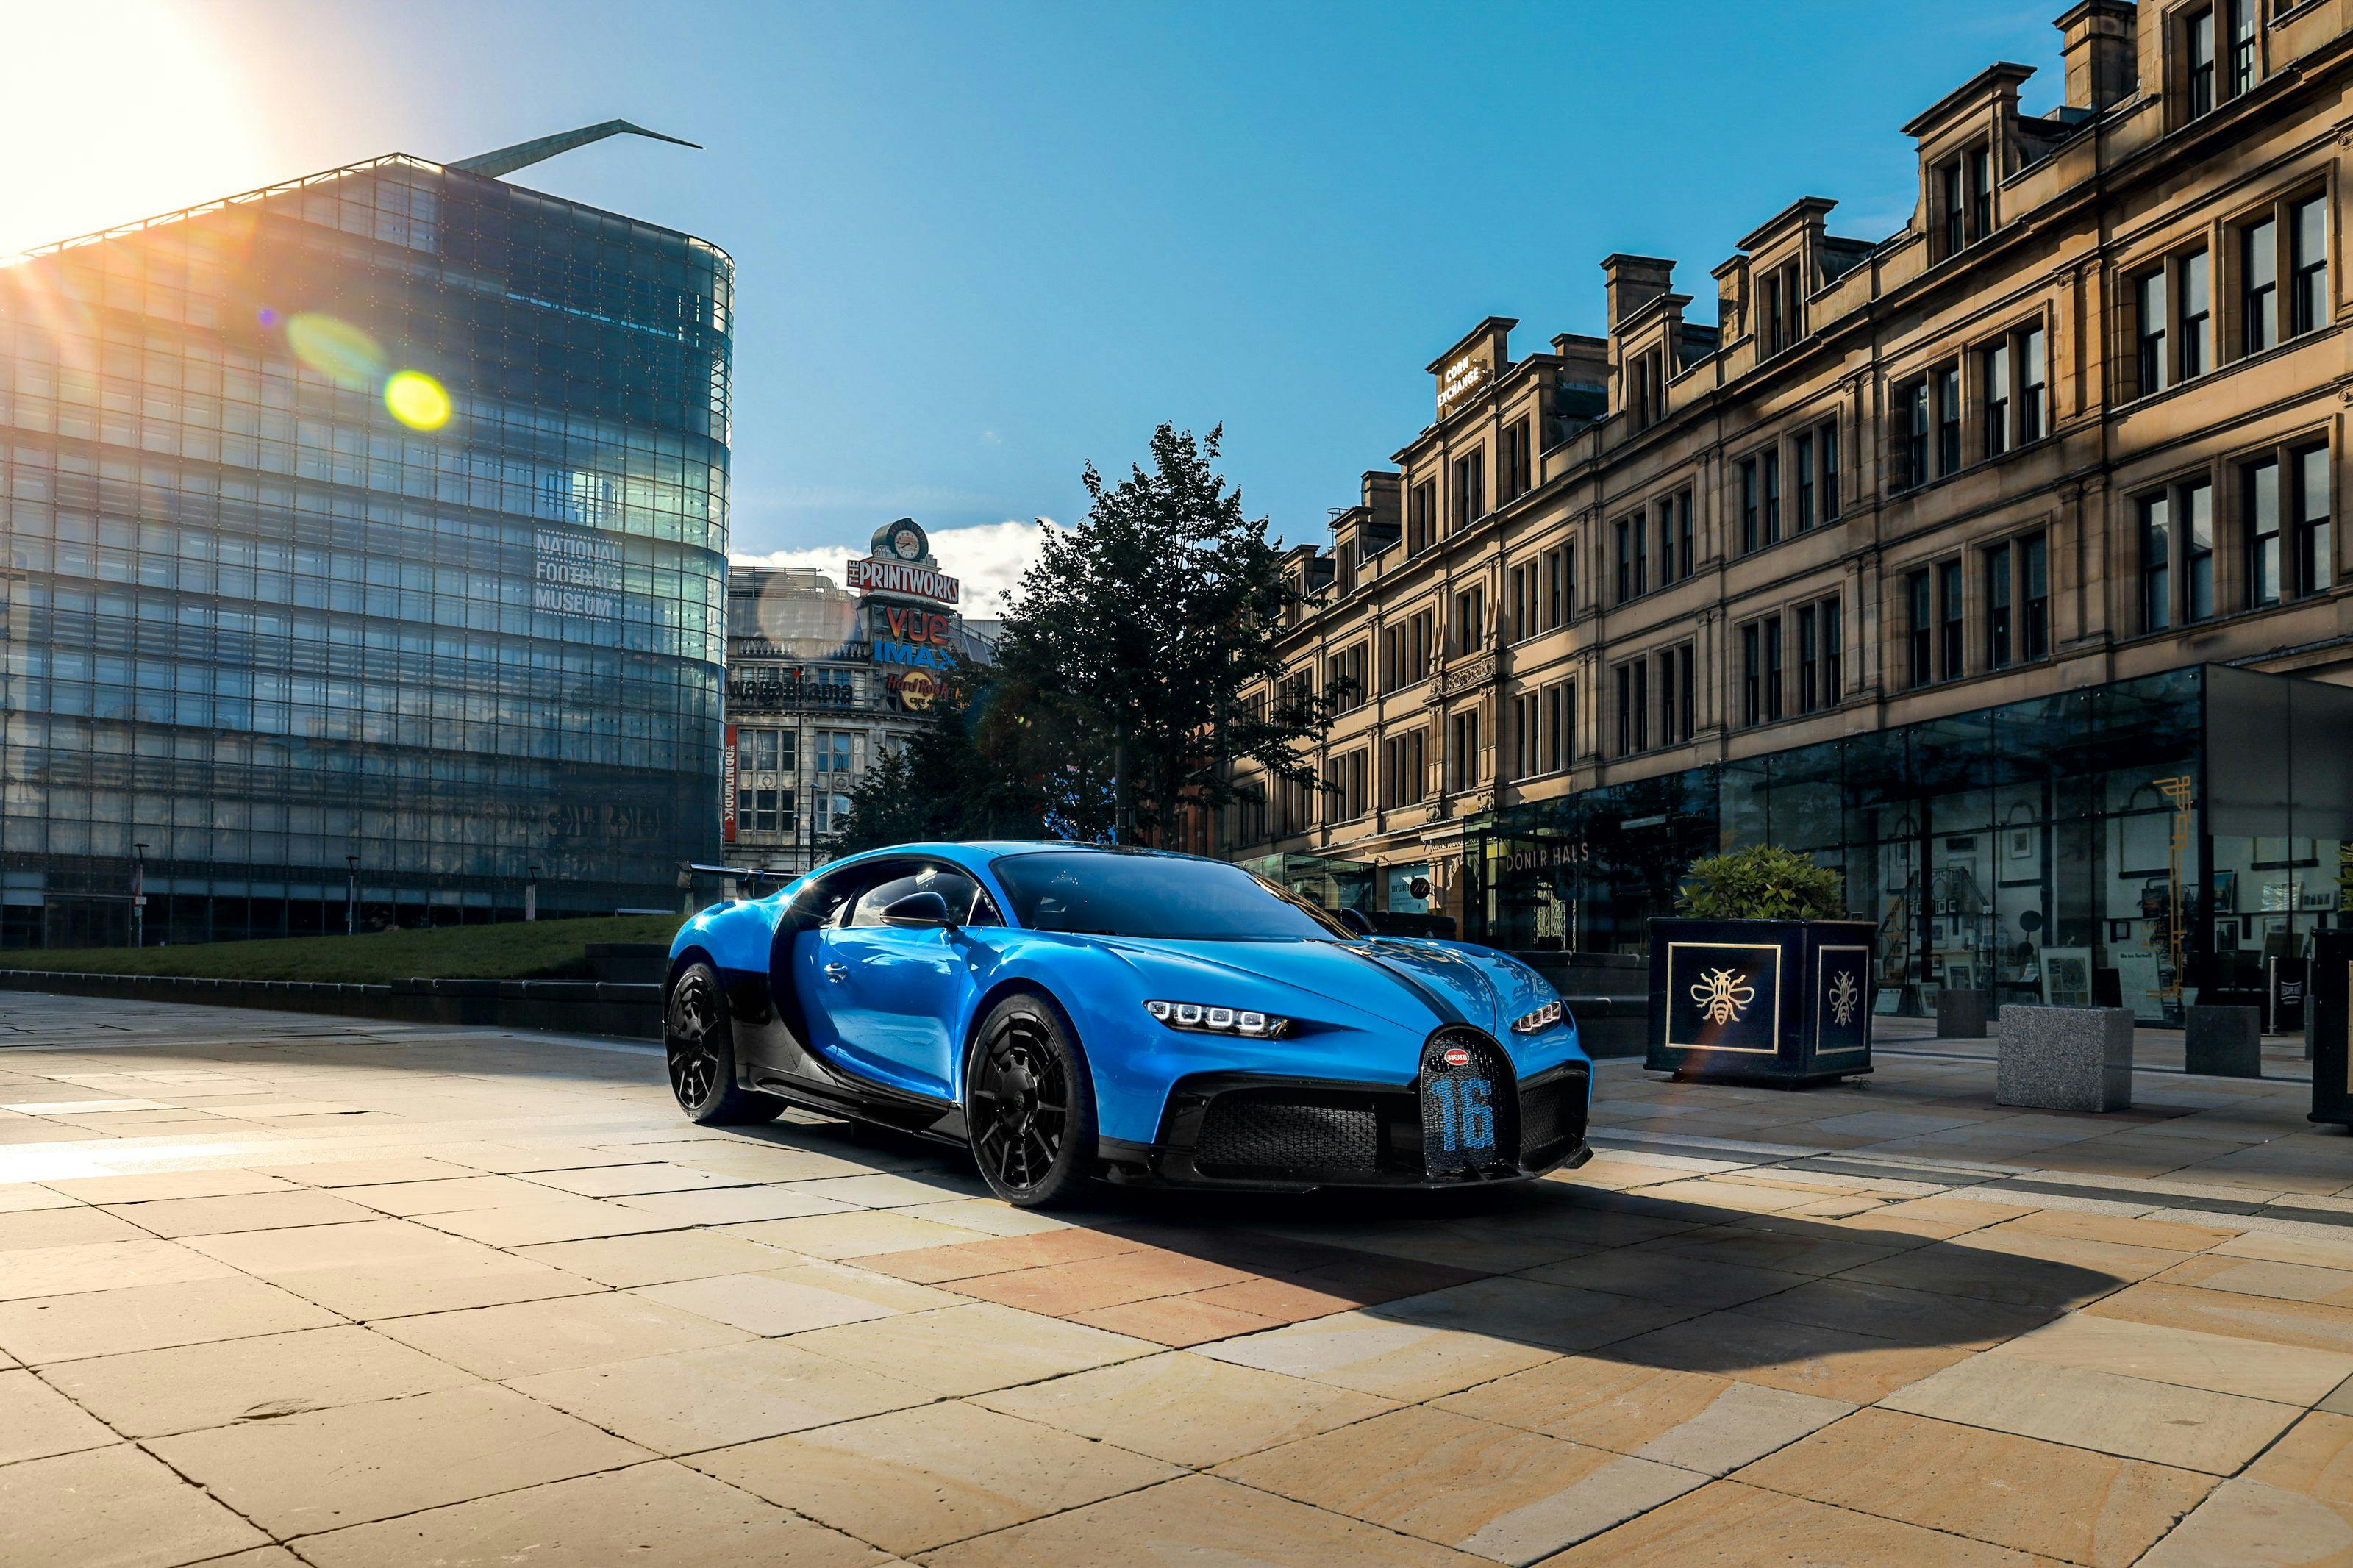 European Roadshow: Manchester welcomes the Chiron Pur Sport